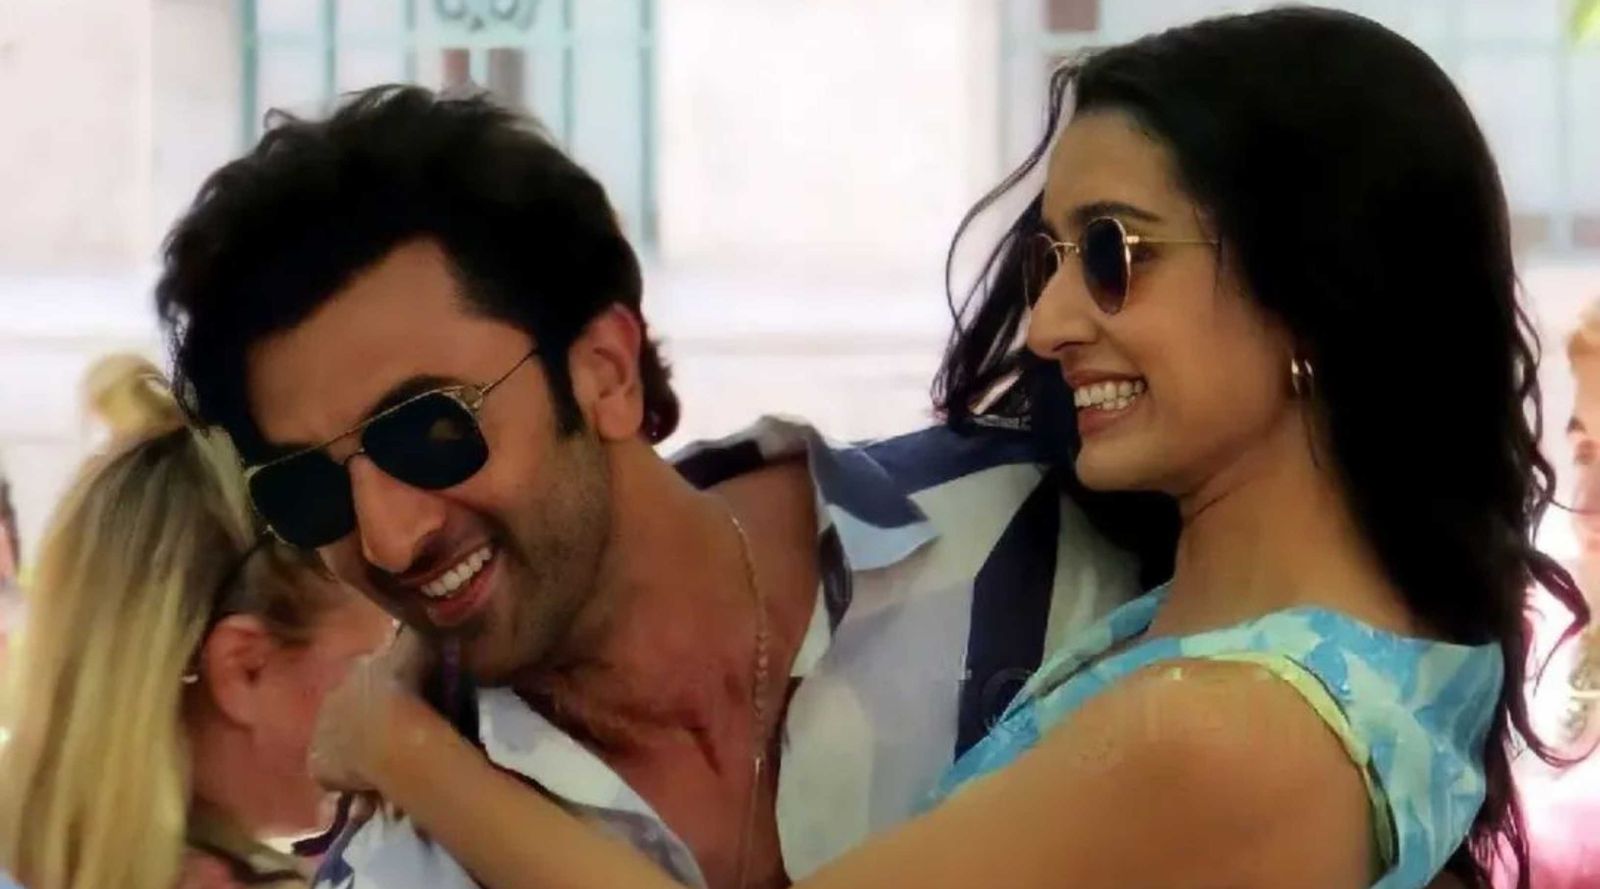 Ranbir Kapoor is all smiles as he picks up Shraddha Kapoor in his arms in a new leaked snap from Luv Ranjan’s next